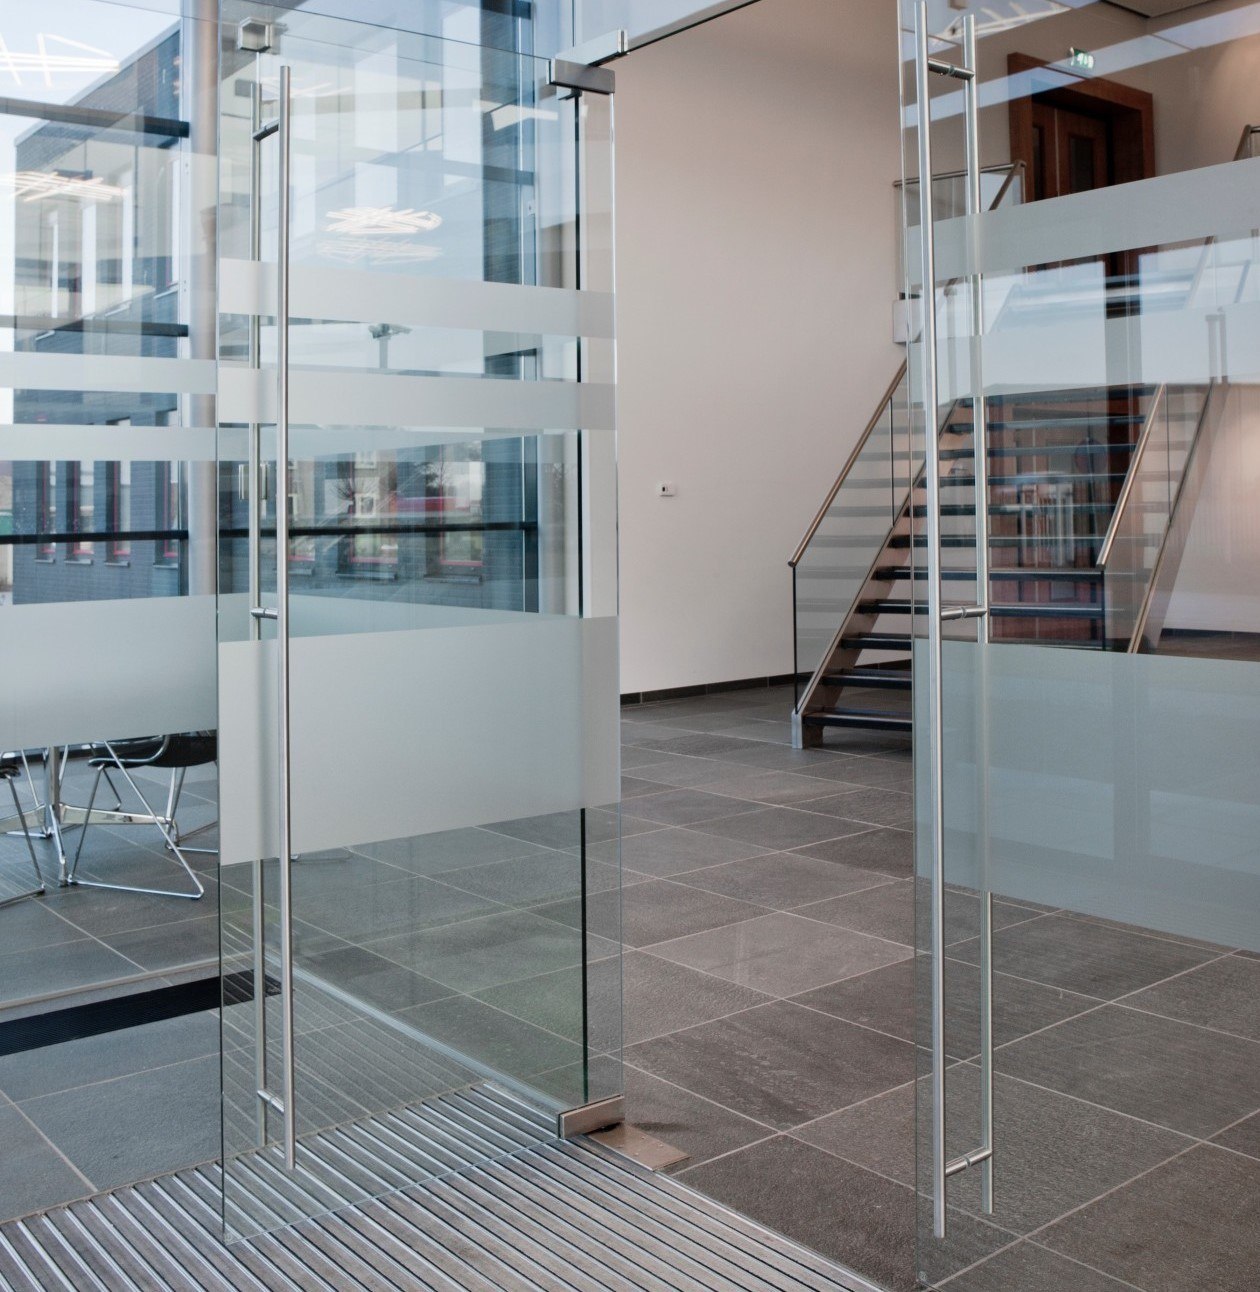 What is a Tempered Glass Door?